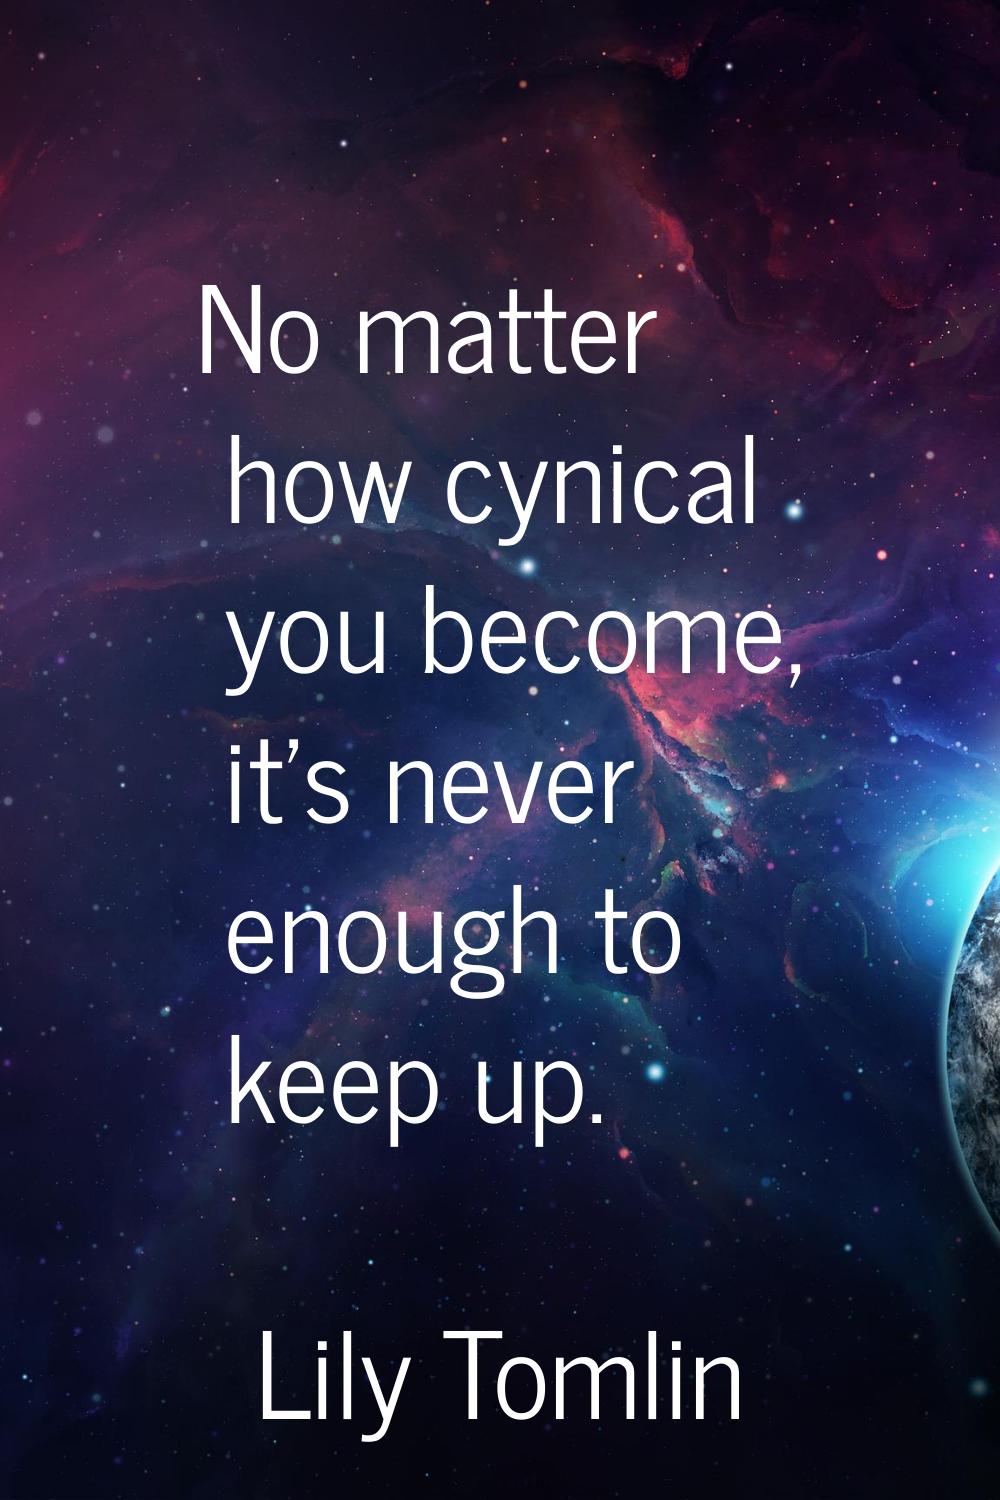 No matter how cynical you become, it's never enough to keep up.